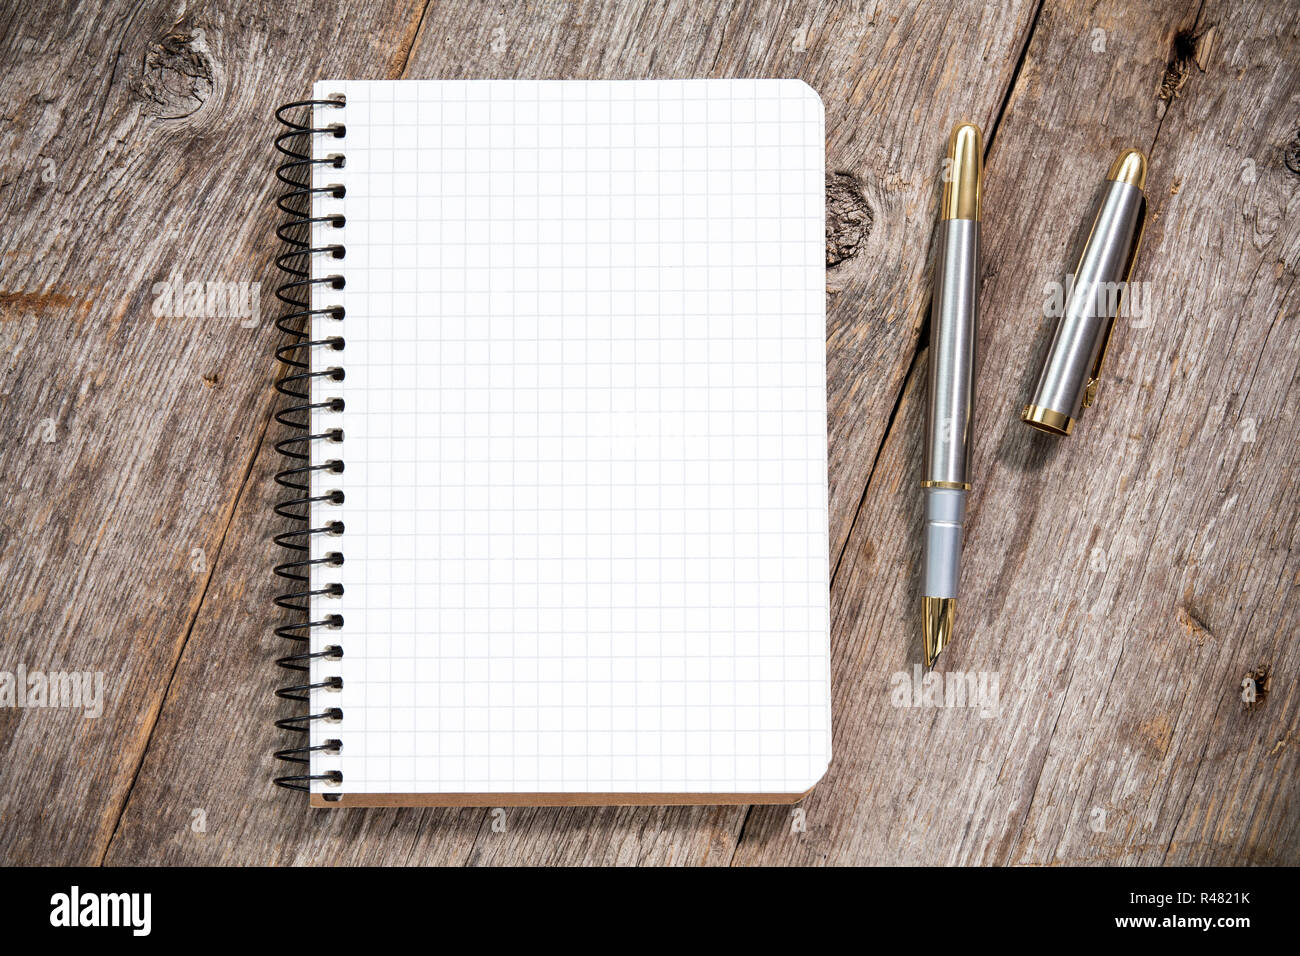 Fountain pen and notebook with square grid Stock Photo